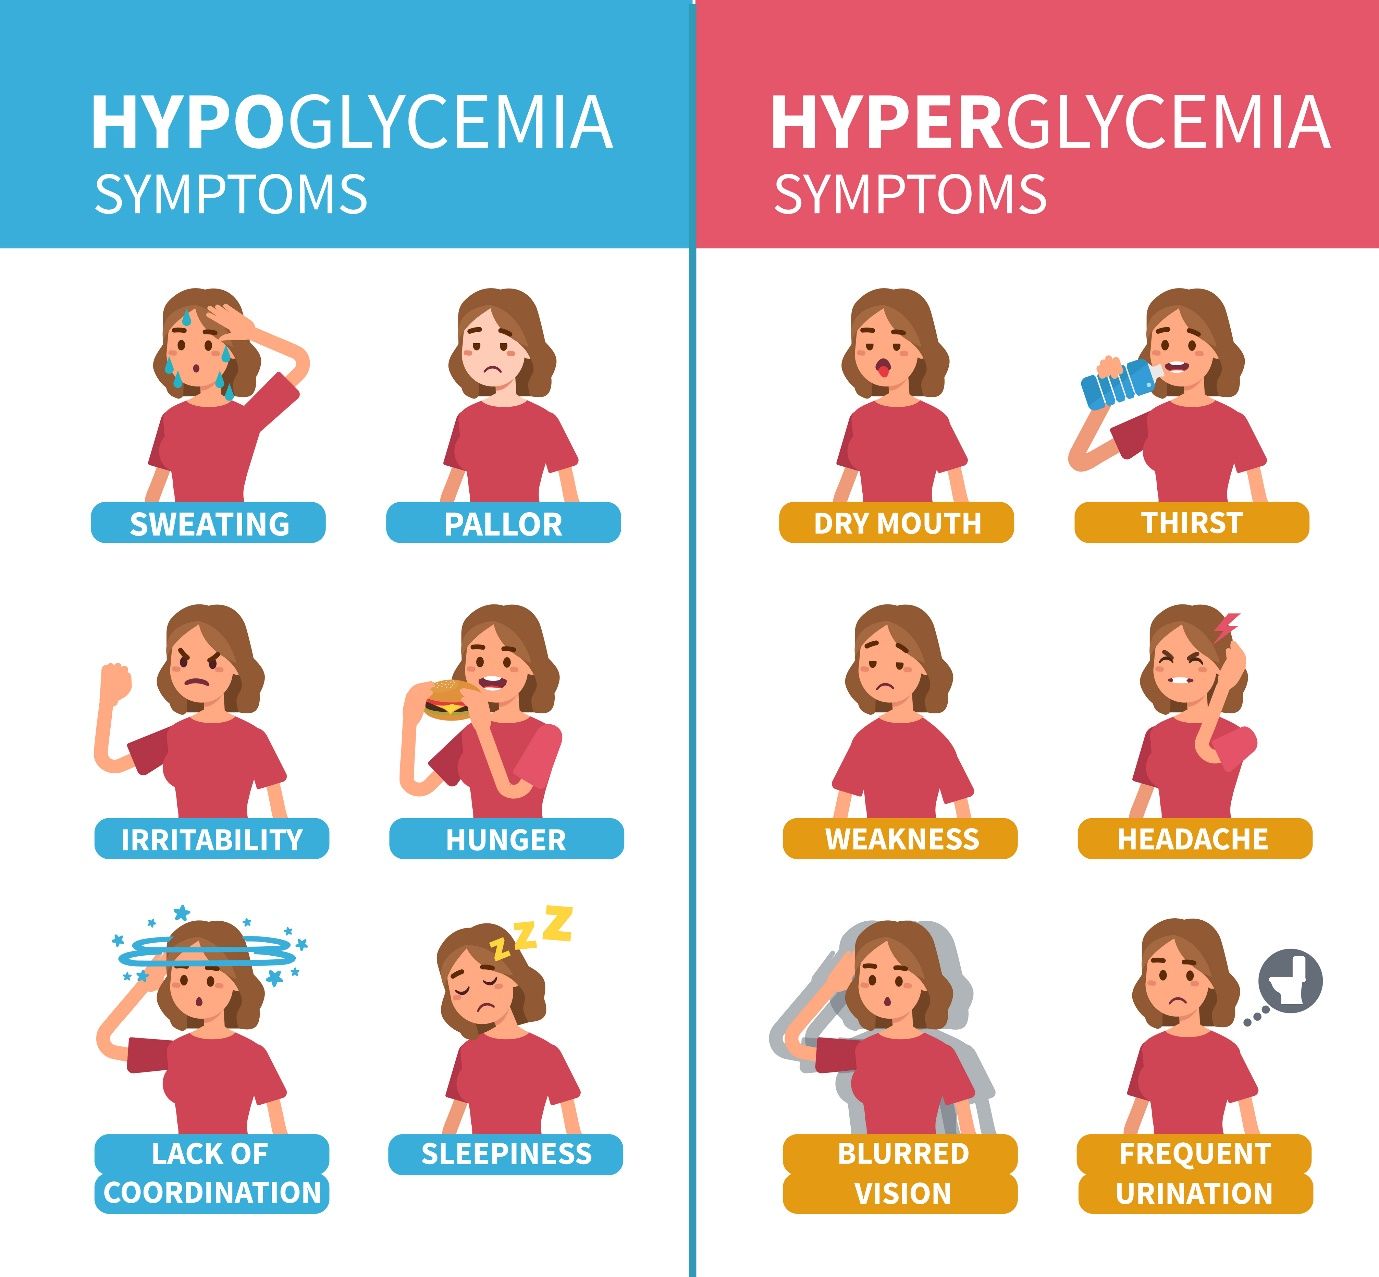 Symptoms of hypoglycemia can range from mild to severe.